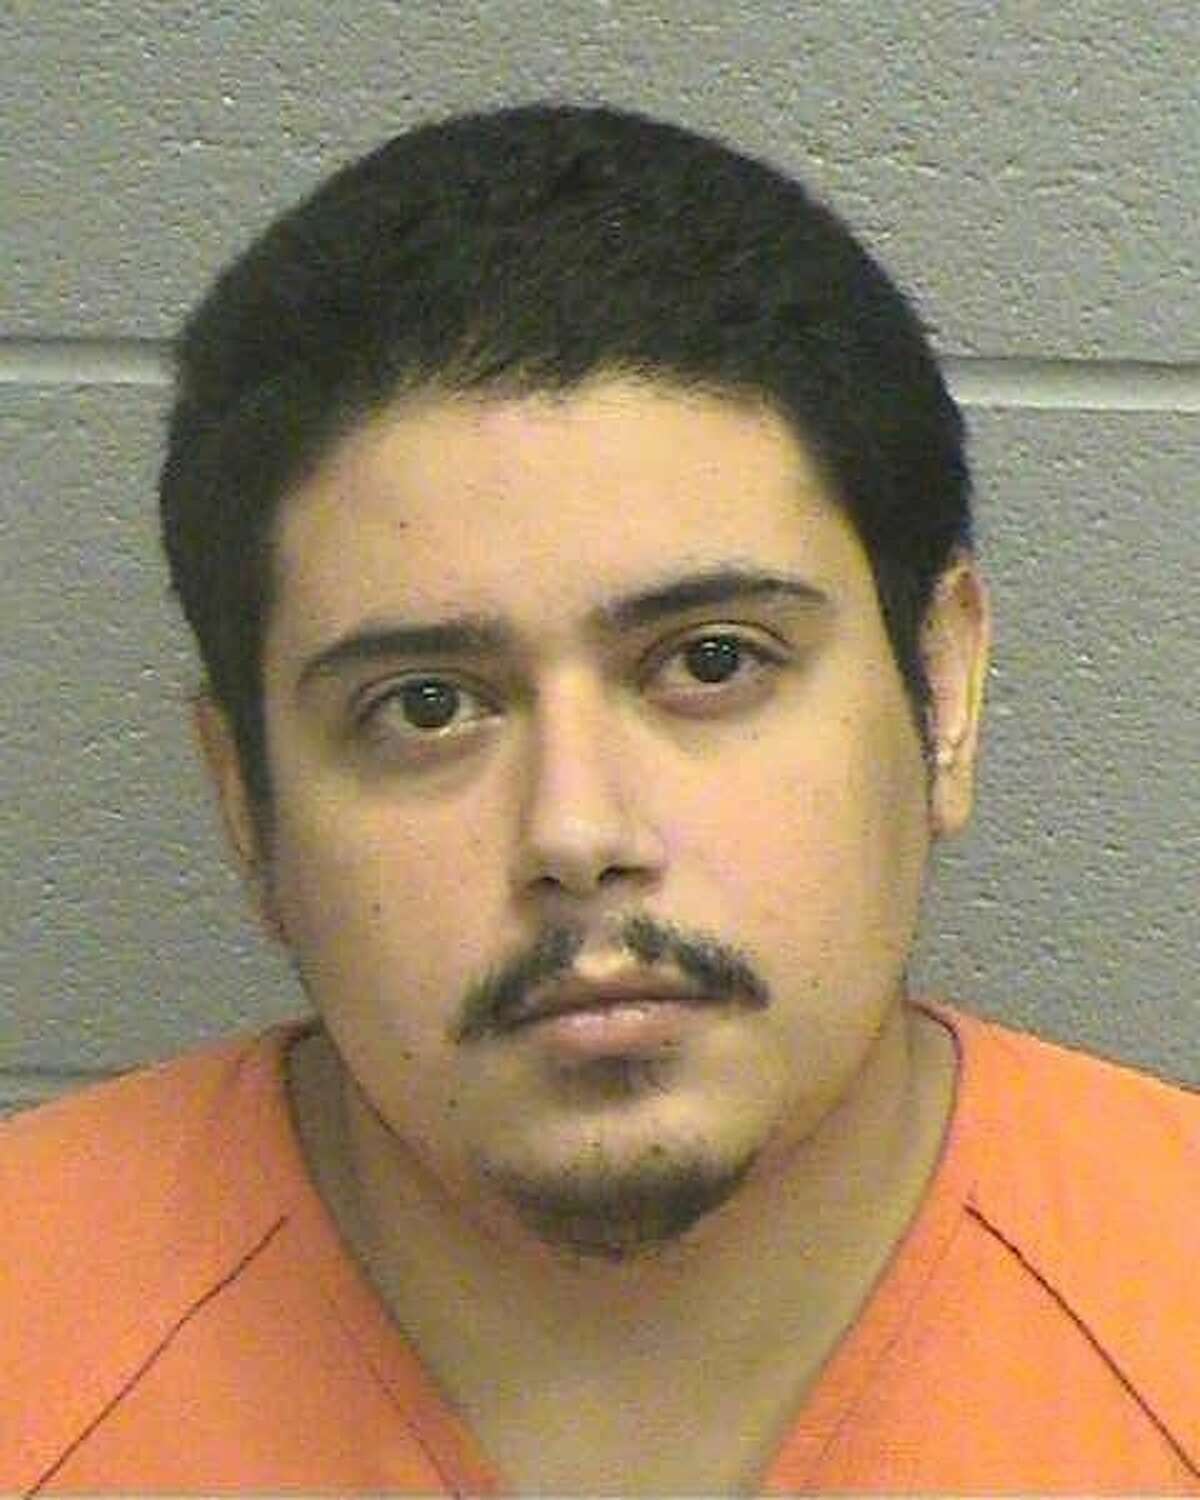 Manuel Rivera Jr., 24, was being held Monday on three second-degree felony charges of aggravated assault with a deadly weapon, with bonds totaling $225,000, according to court documents.Rivera was arrested Oct.24 after allegedly pointing a gun at patrons in a Stripes gas station after having smoked various hallucinogenic drugs.